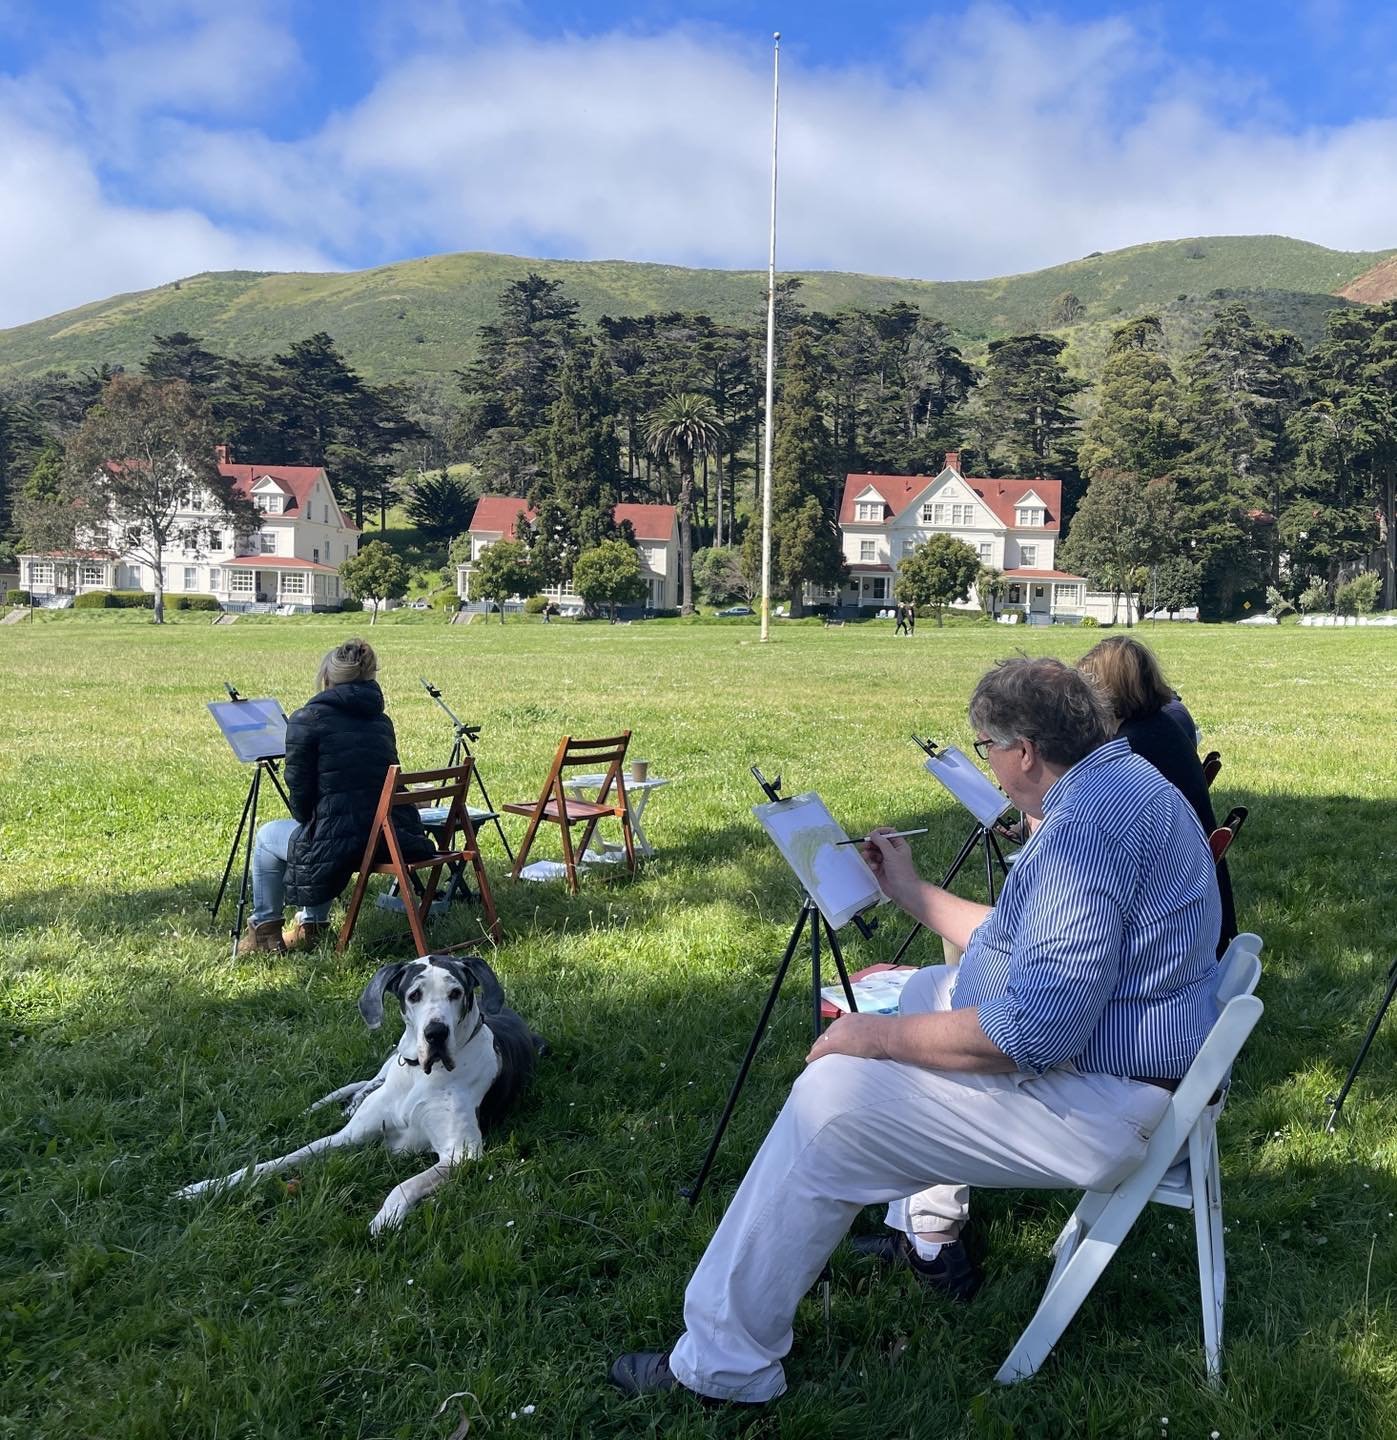 Today was magical, for this team! They got to create art outside on this beautiful day at Cavallo Point. #teambuilding #watercolor #nature  #funactivity @cavallopoint @cavallopointmercantile